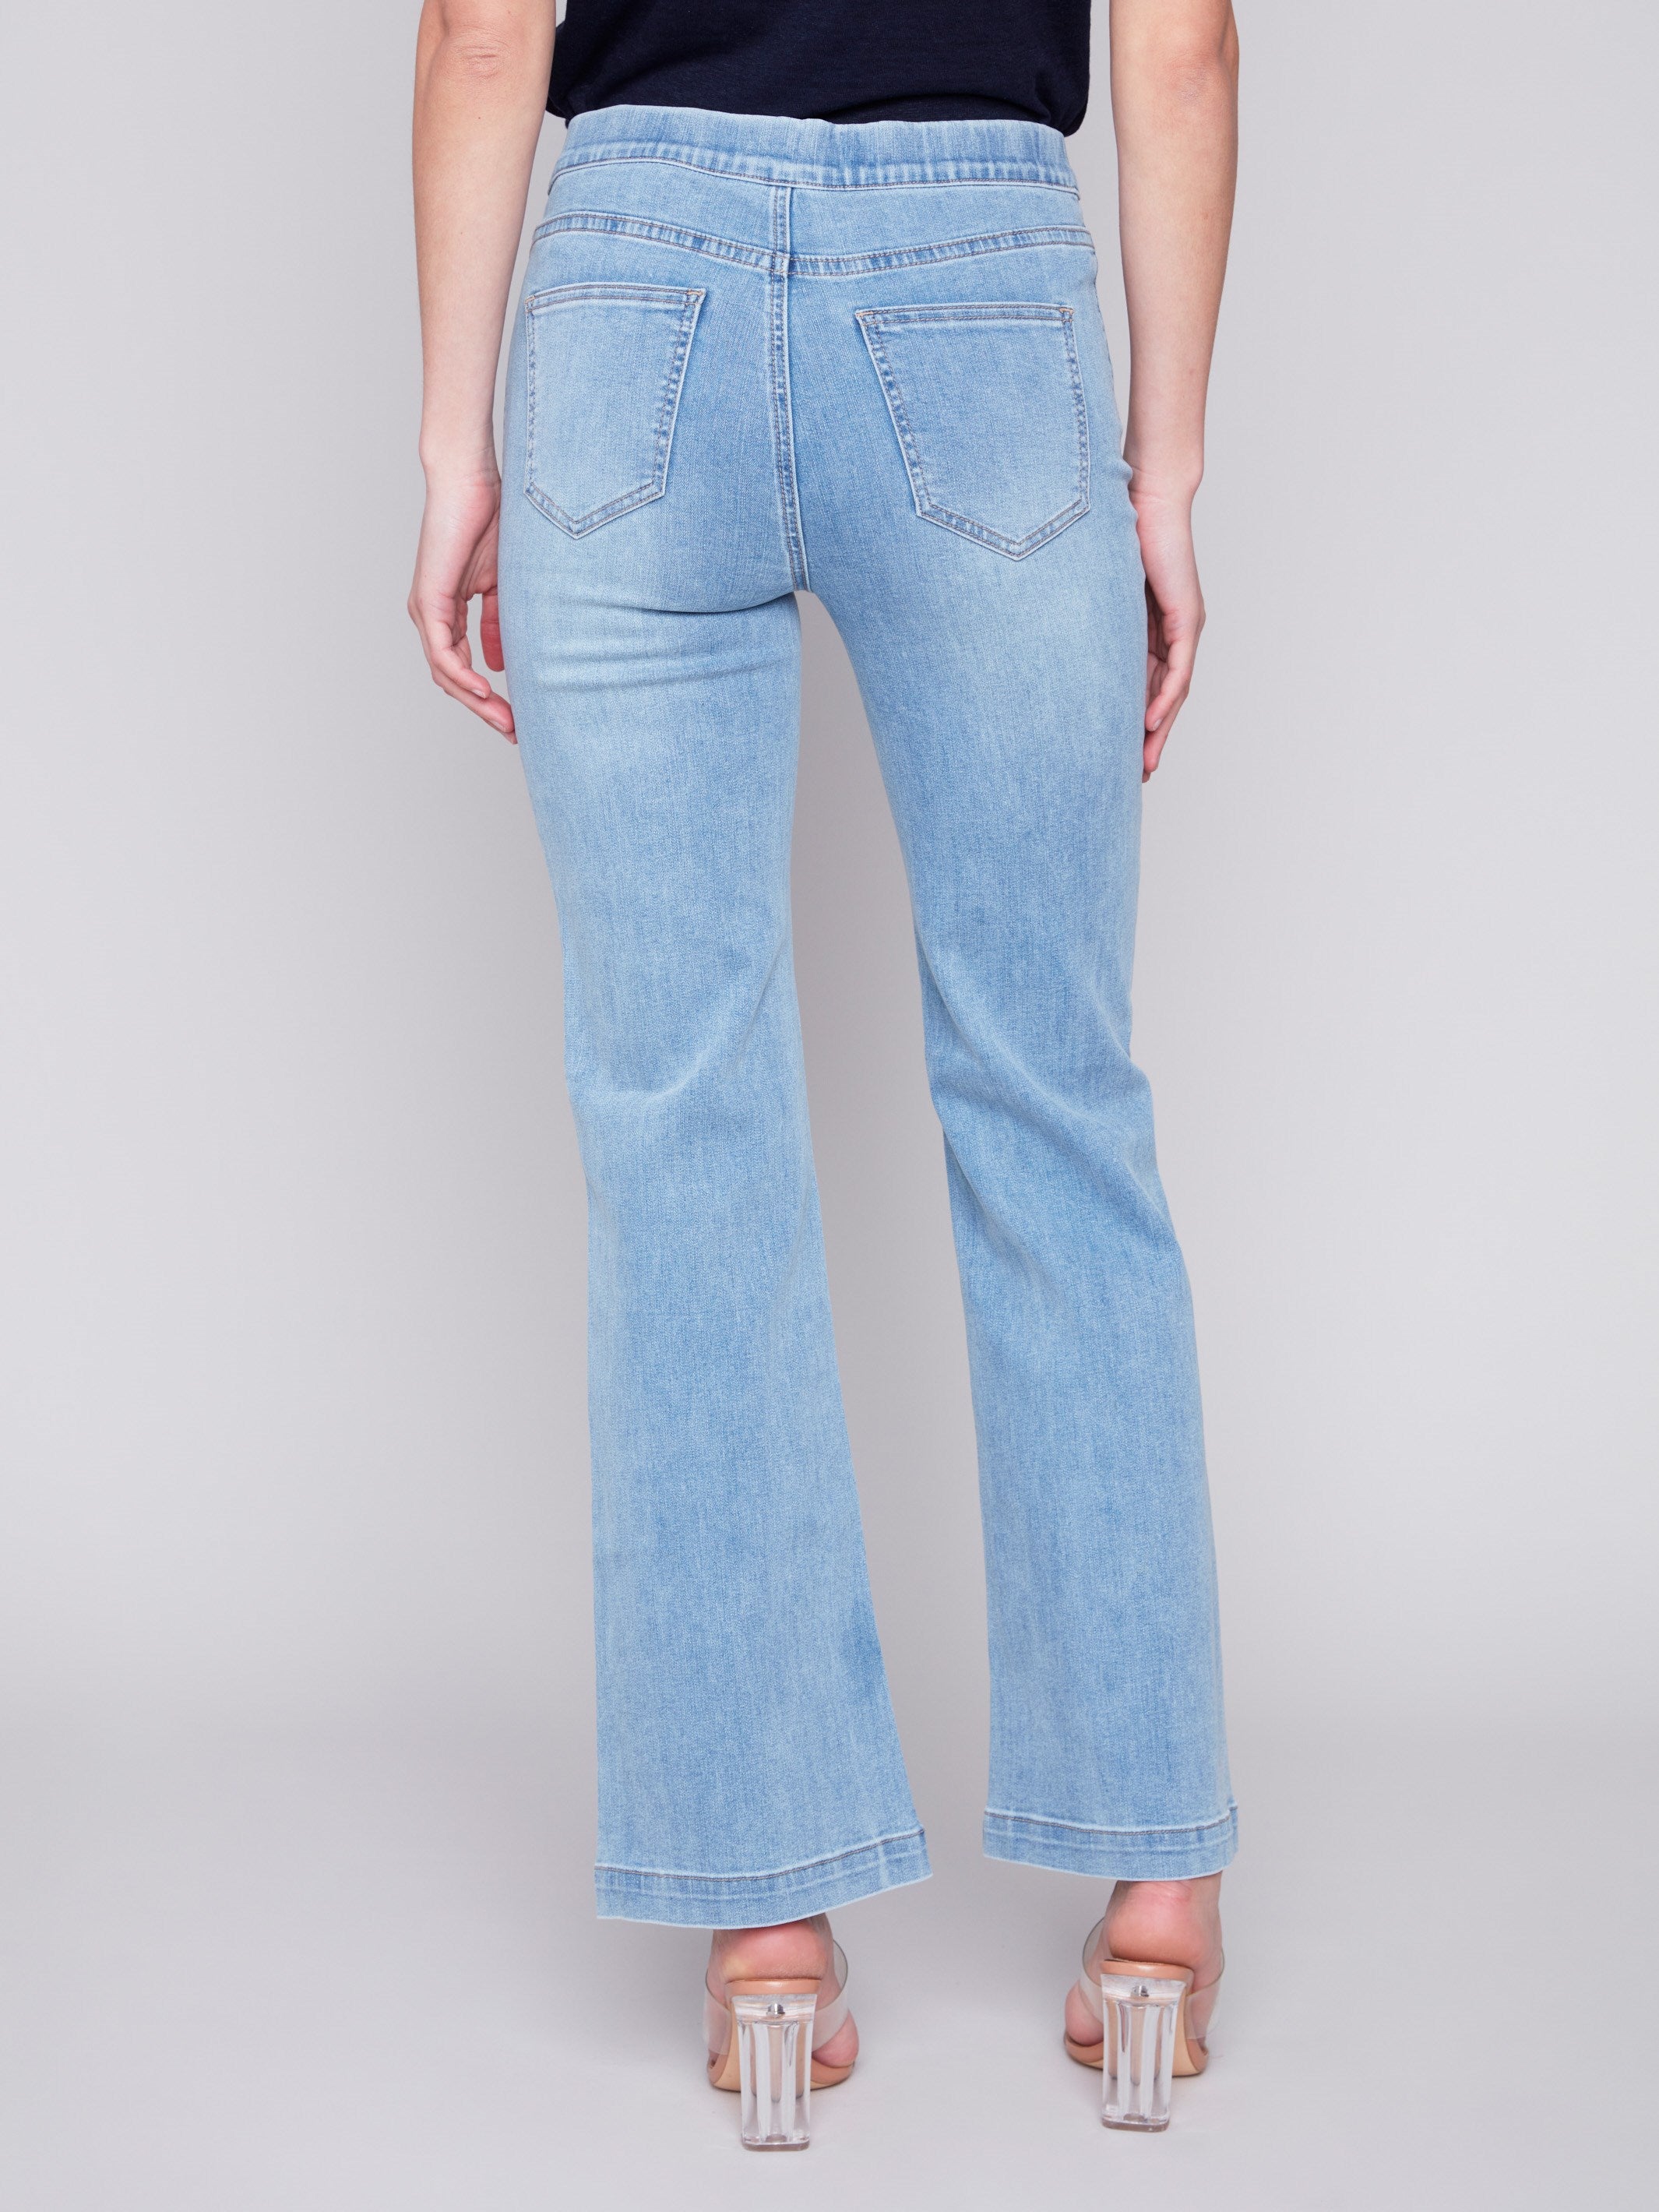 Charlie B Flare Jeans with Decorative Buttons - Light Blue - Image 3